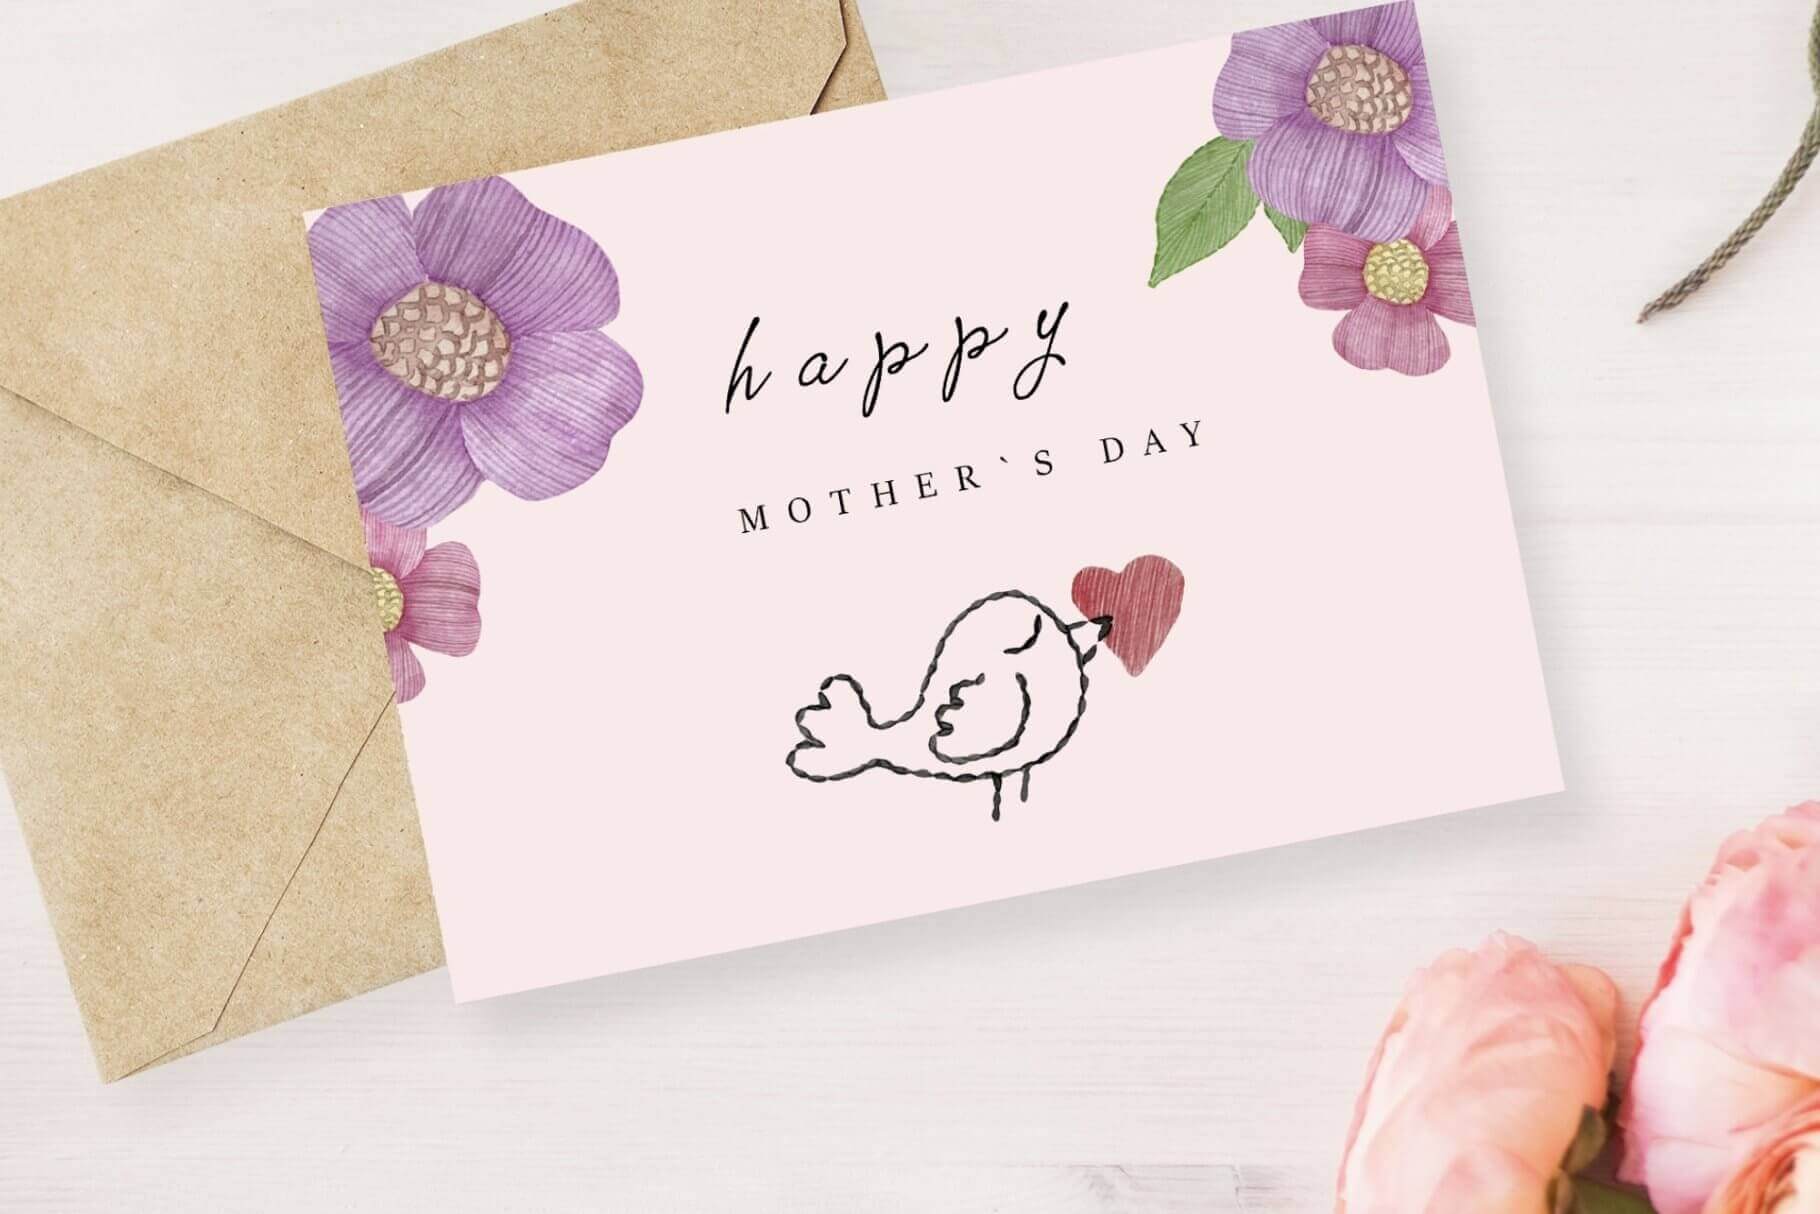 Pale pink card on which an embroidered bird and flowers are drawn with the inscription Happy Mother's Day.